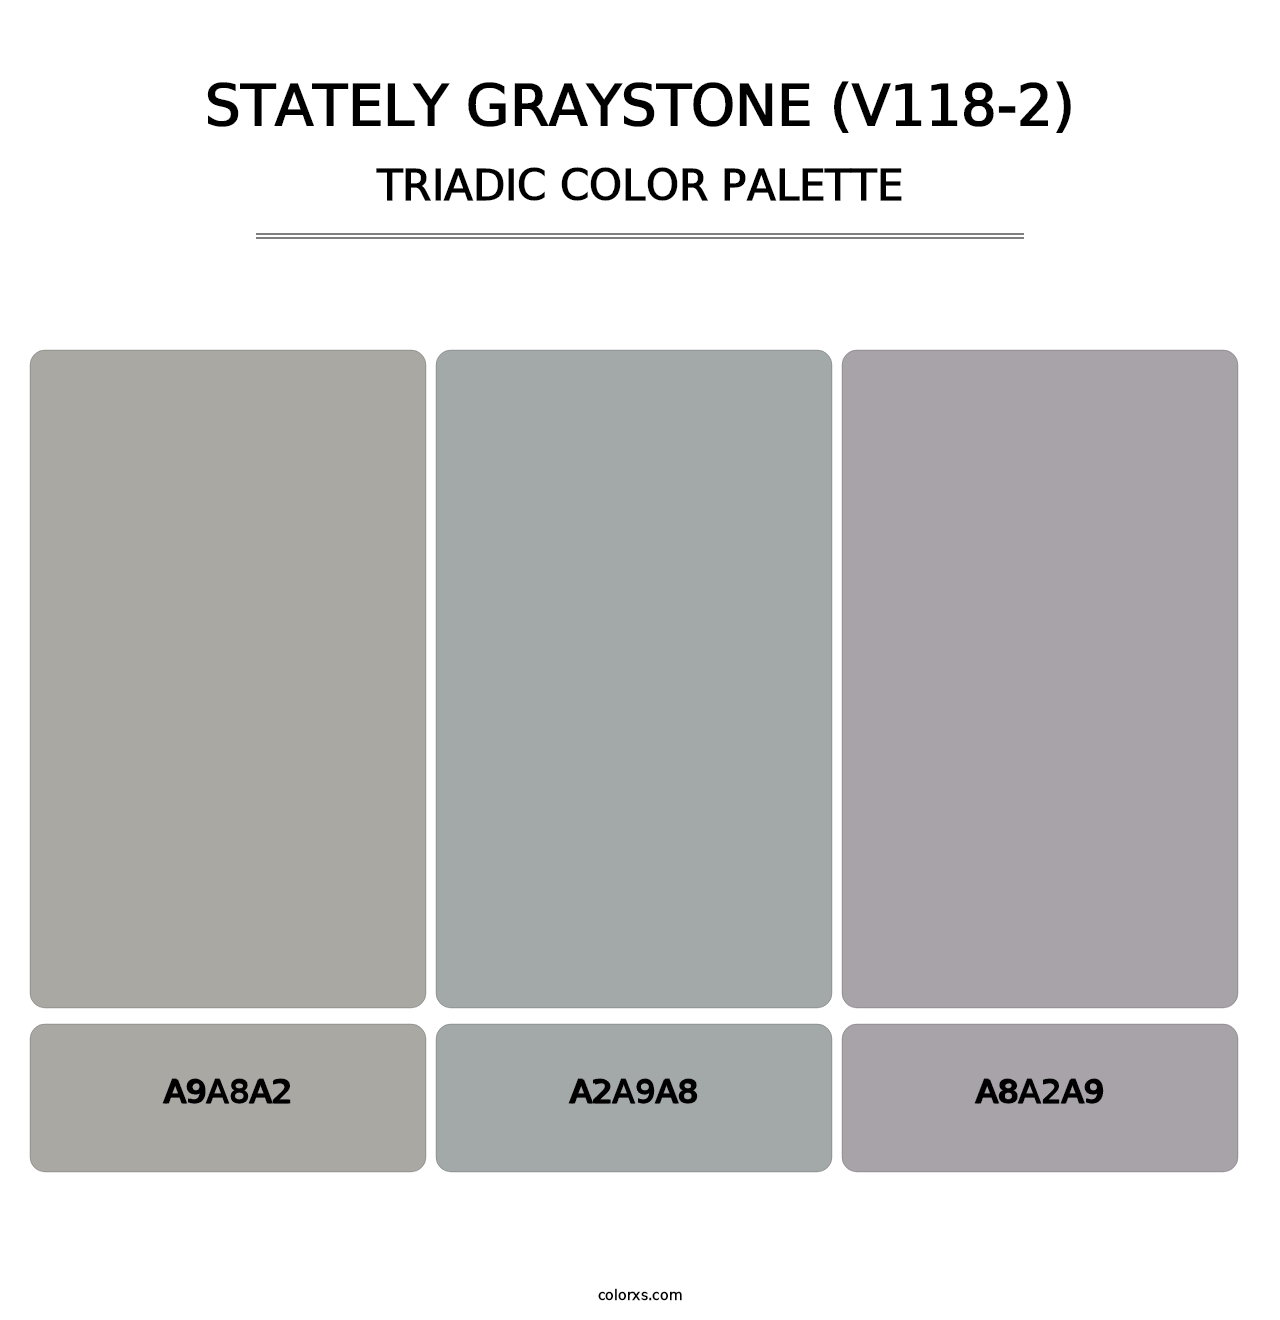 Stately Graystone (V118-2) - Triadic Color Palette